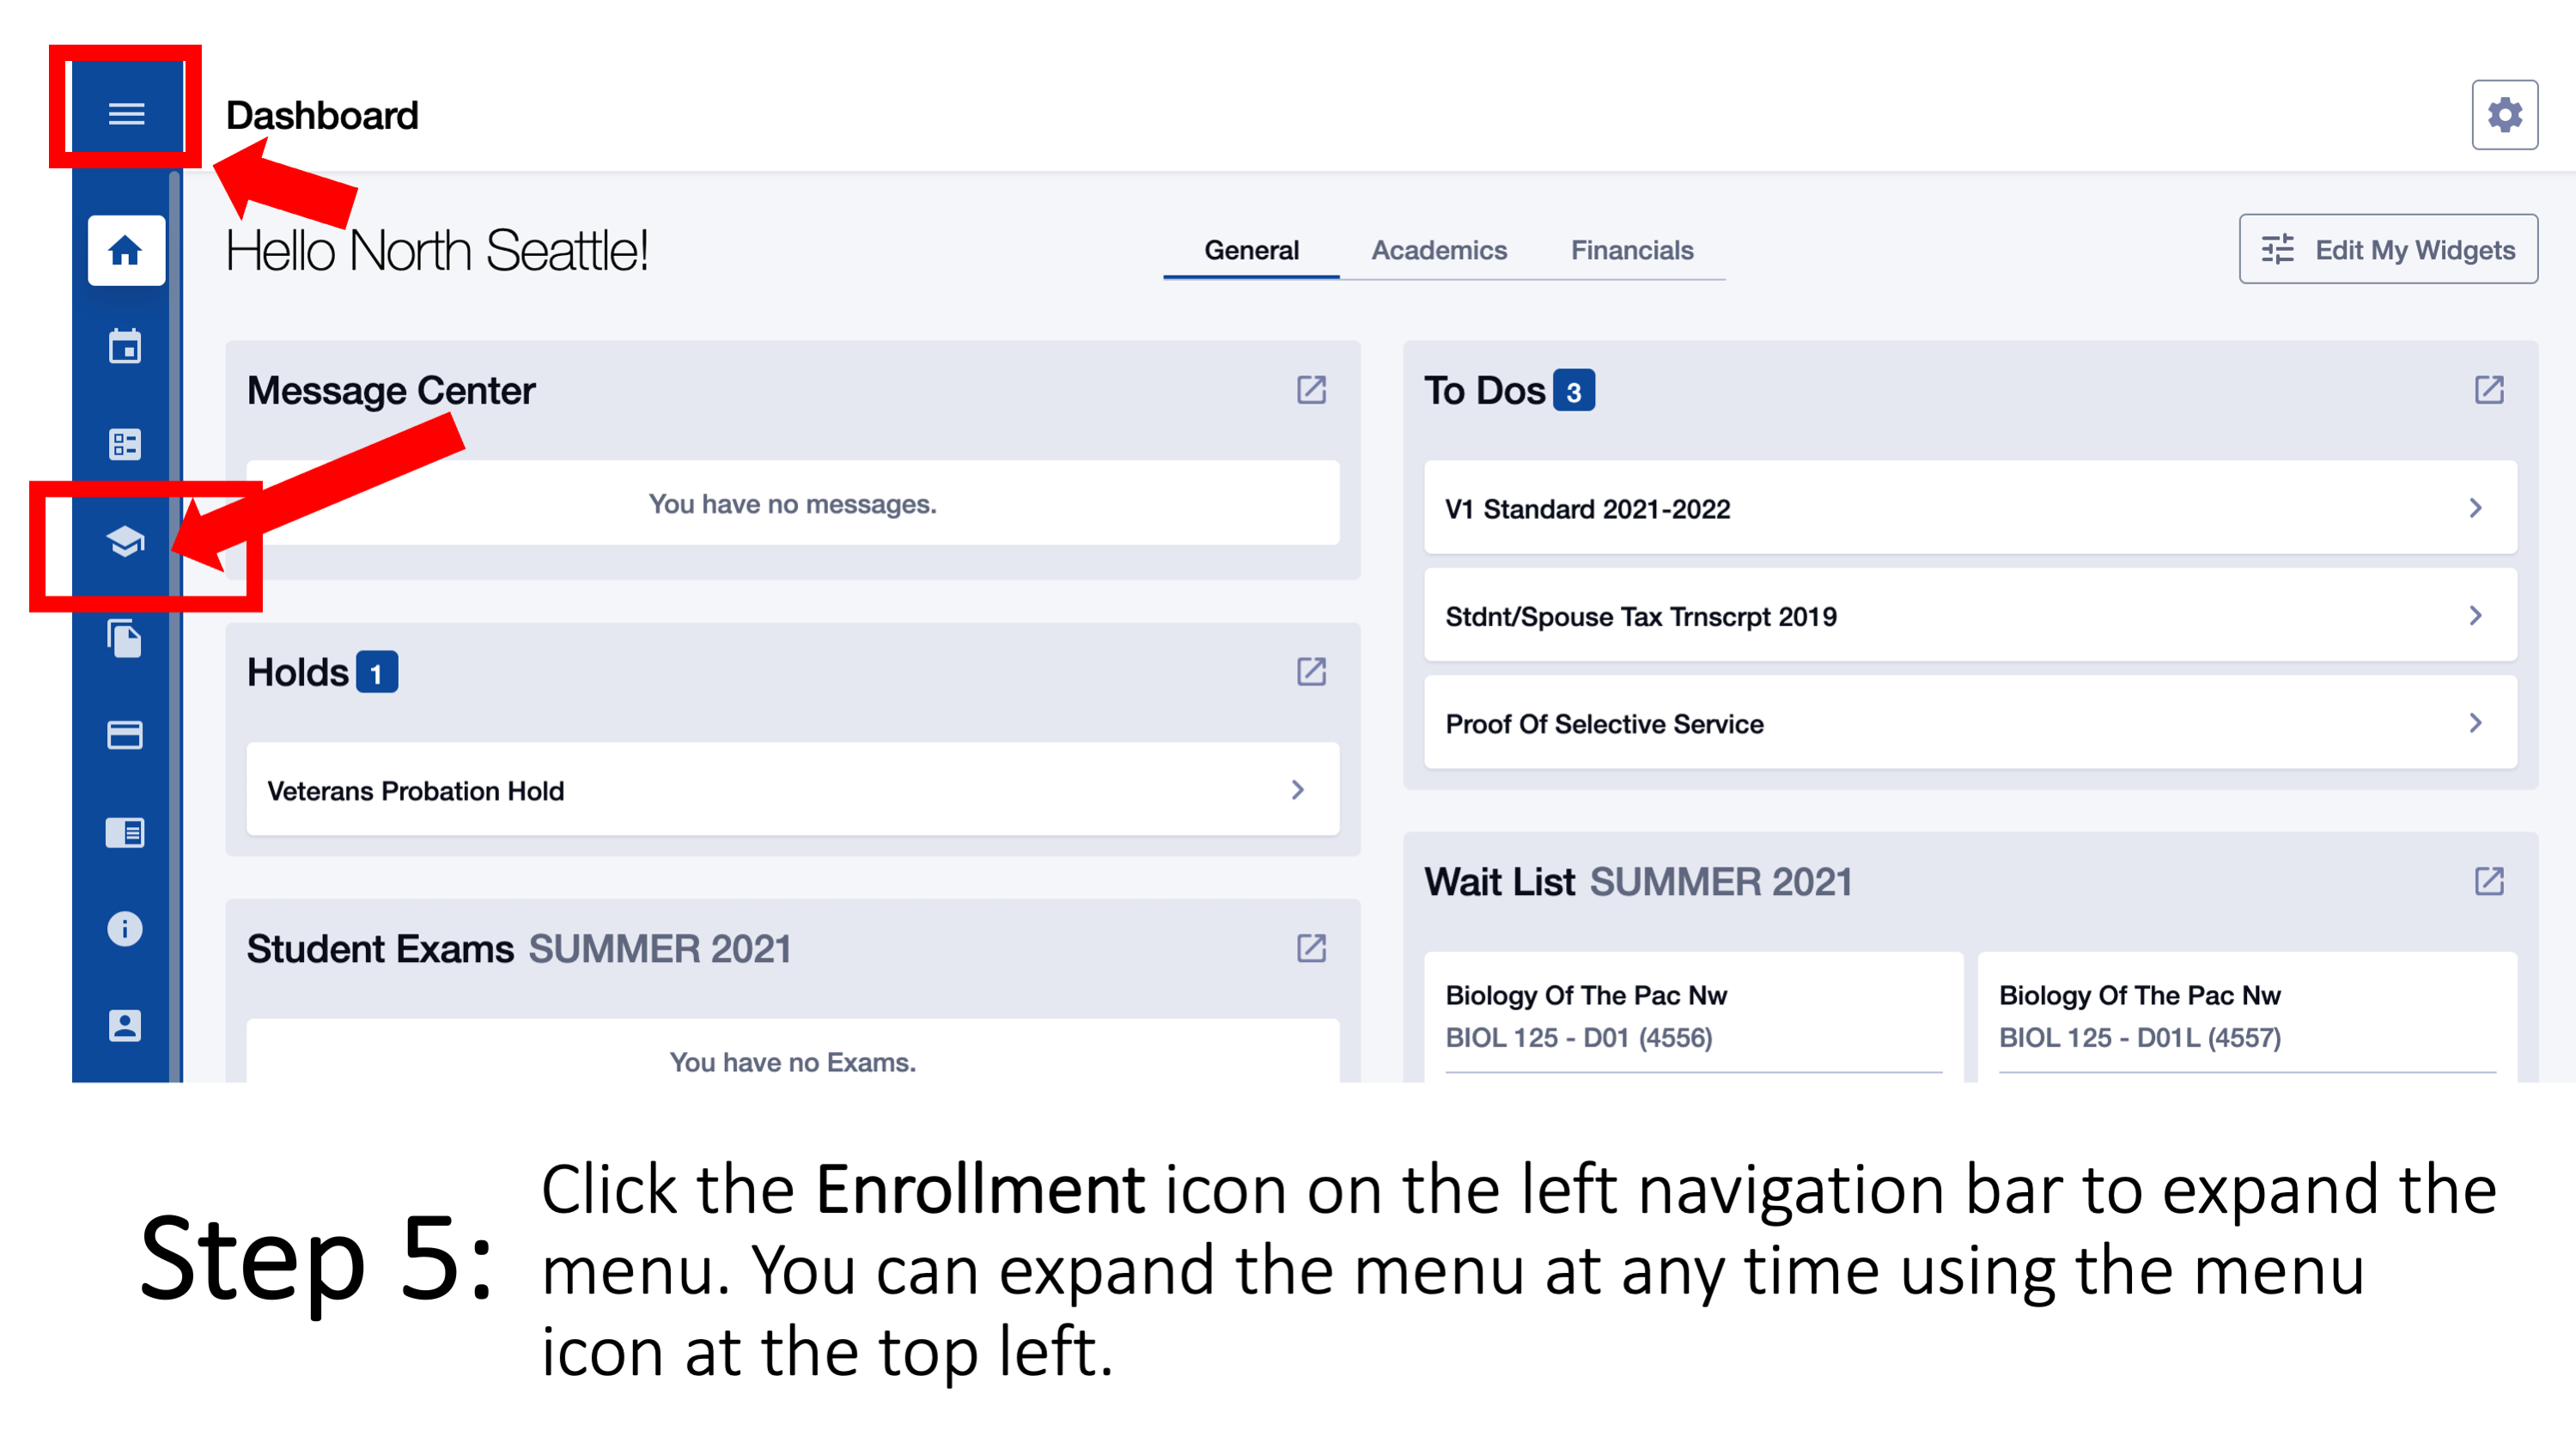 Step 5: Click the Enrollment icon on the left navigation bar to expand the menu. You can expand the menu at any time using the menu icon at the top left.